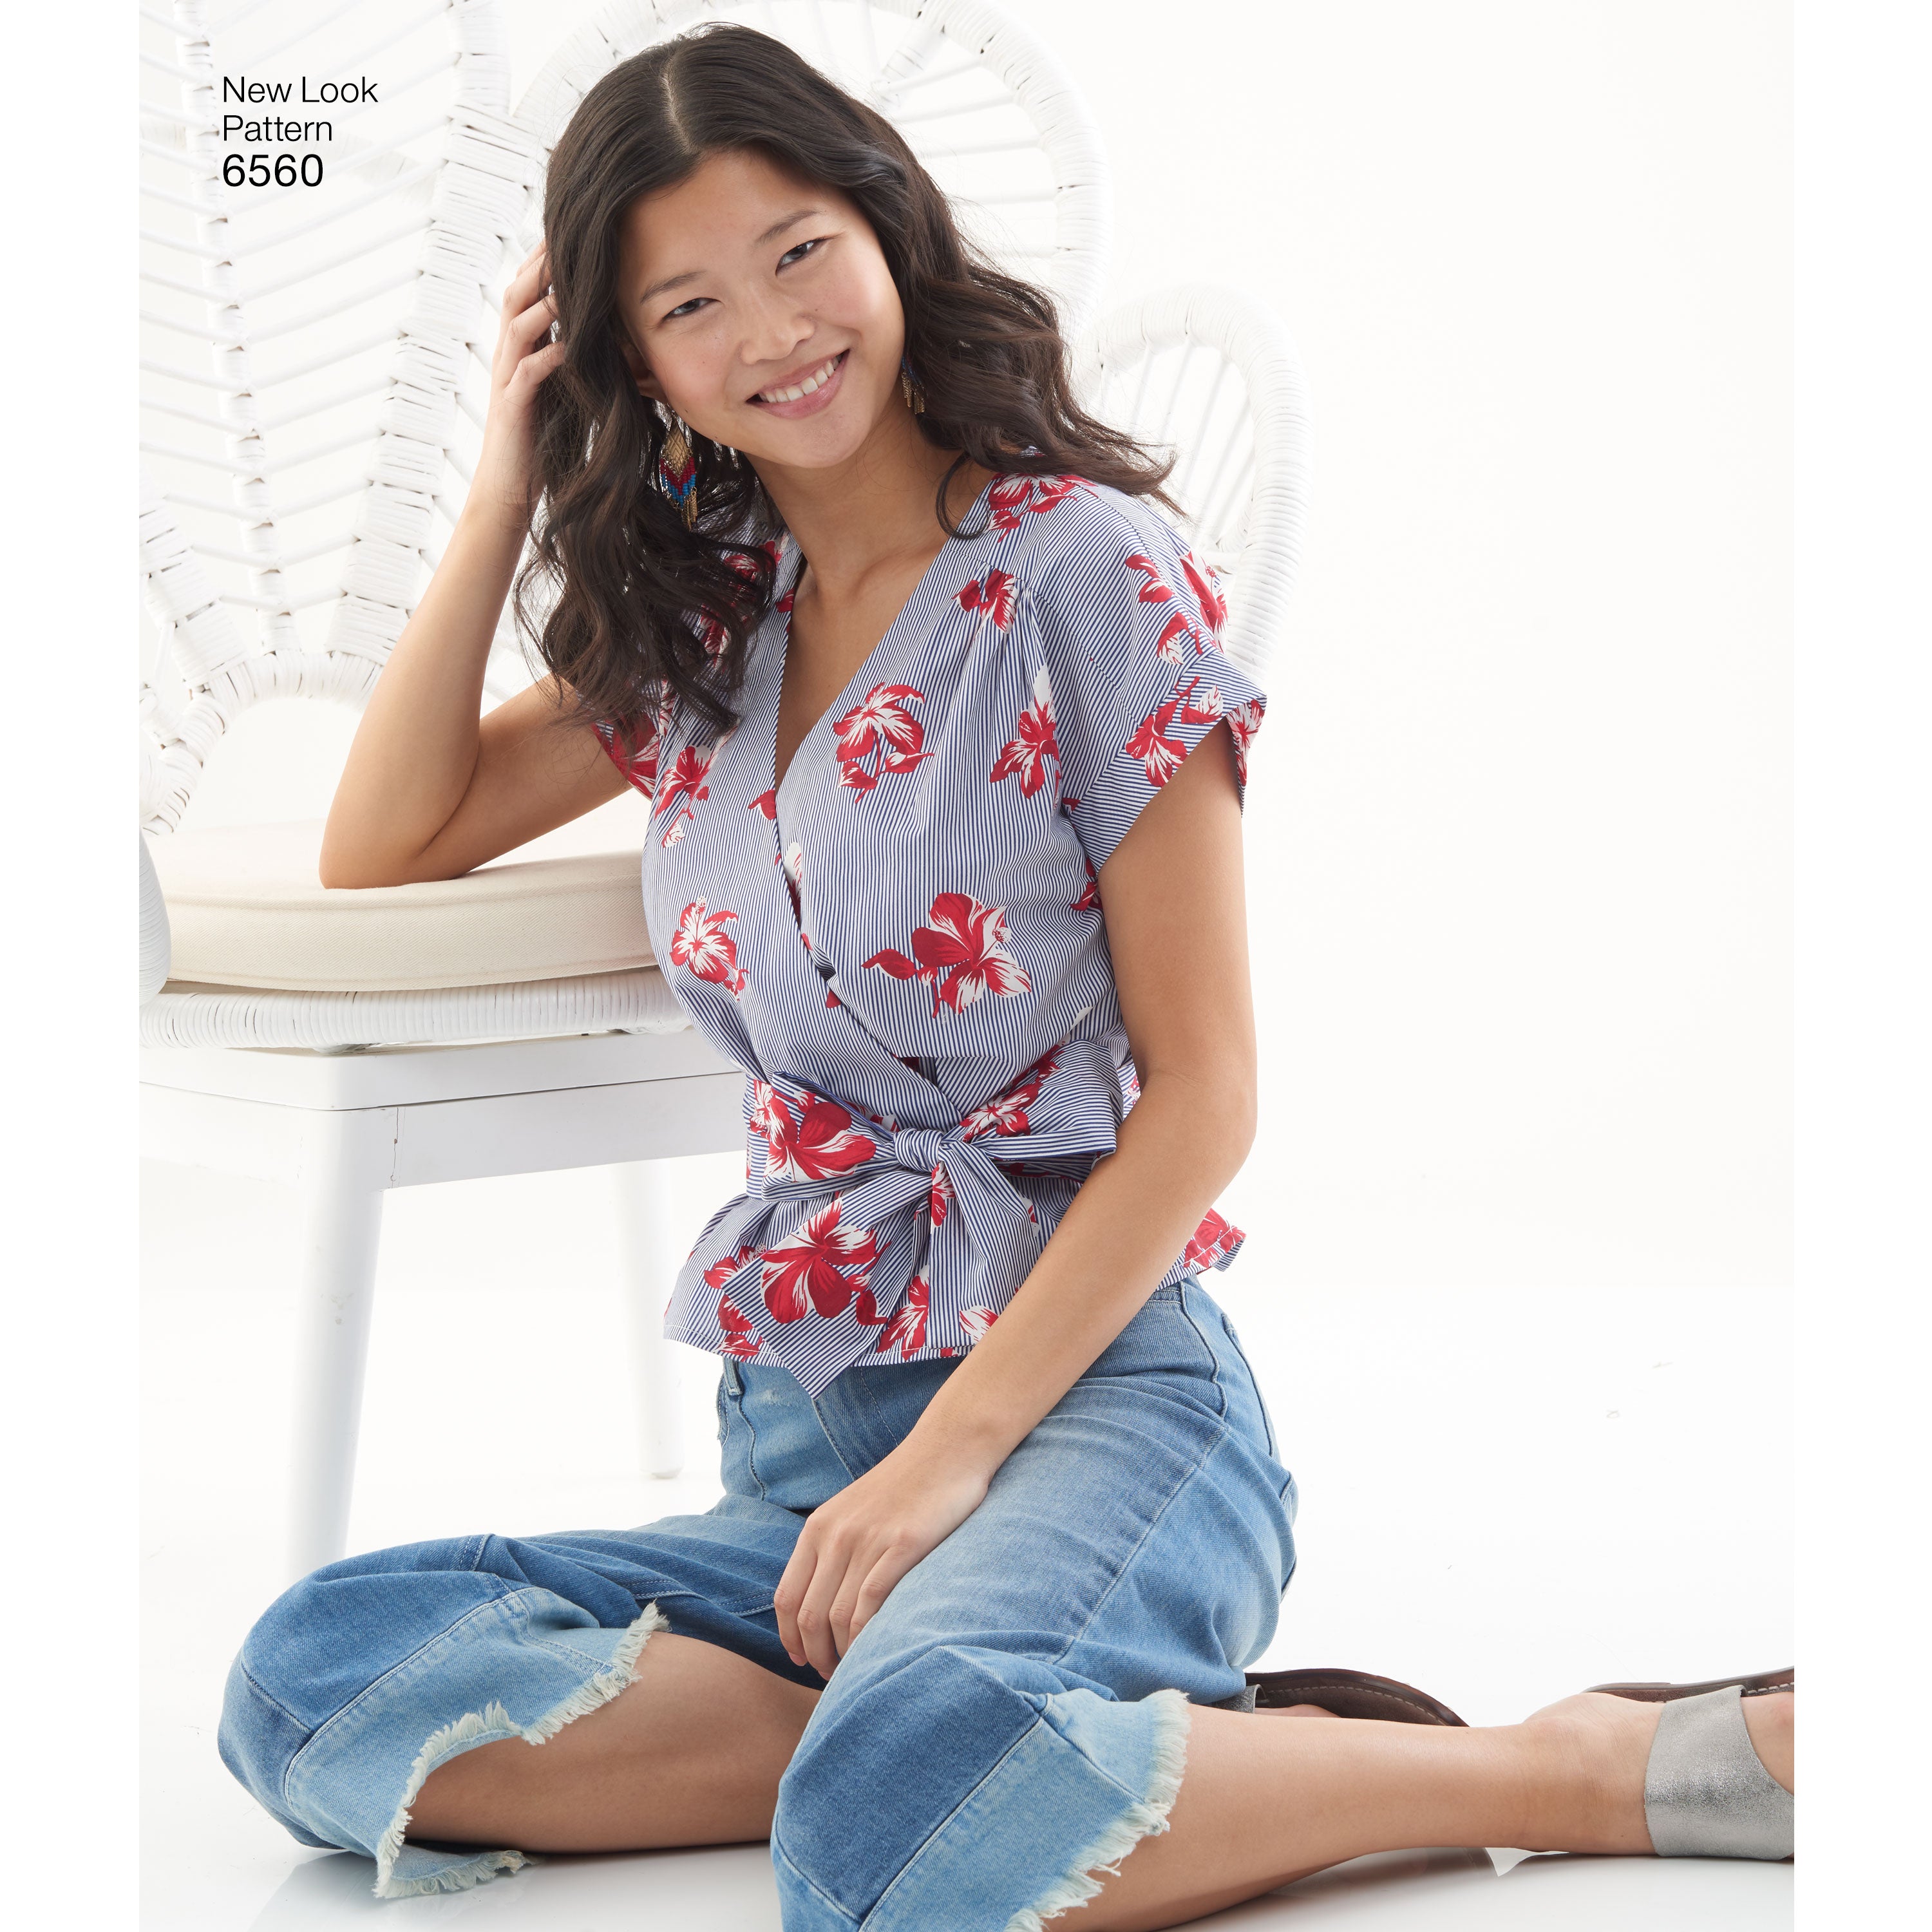 New Look Sewing Pattern 6560 Women's Wrap Tops My Sewing Box